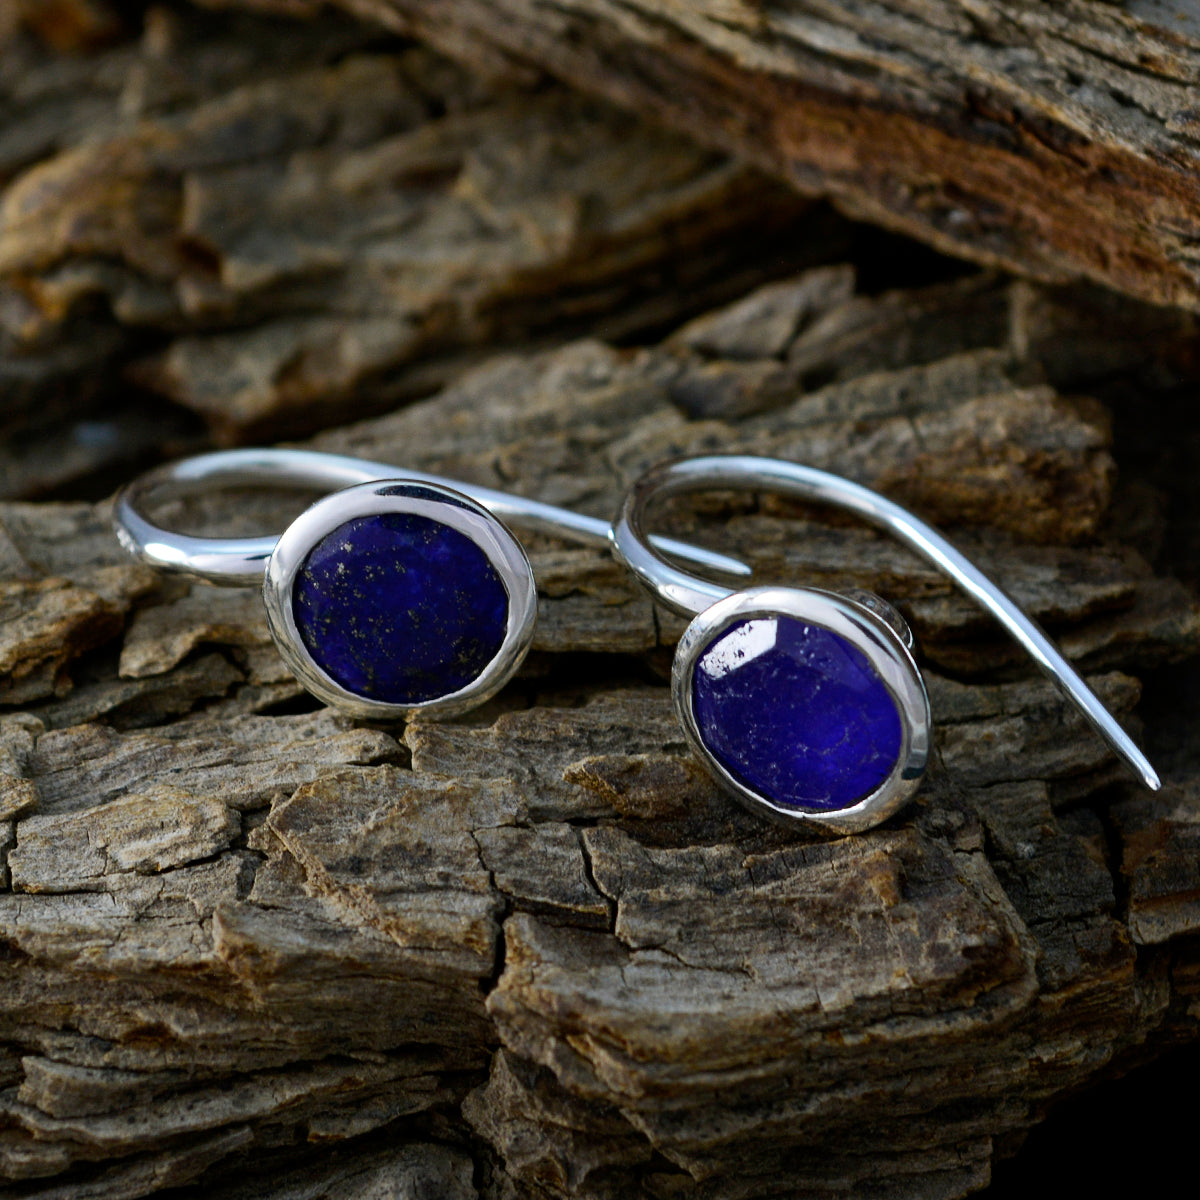 Riyo Genuine Gems round Faceted Nevy Blue Lapis Lazuli Silver Earring anniversary day gift